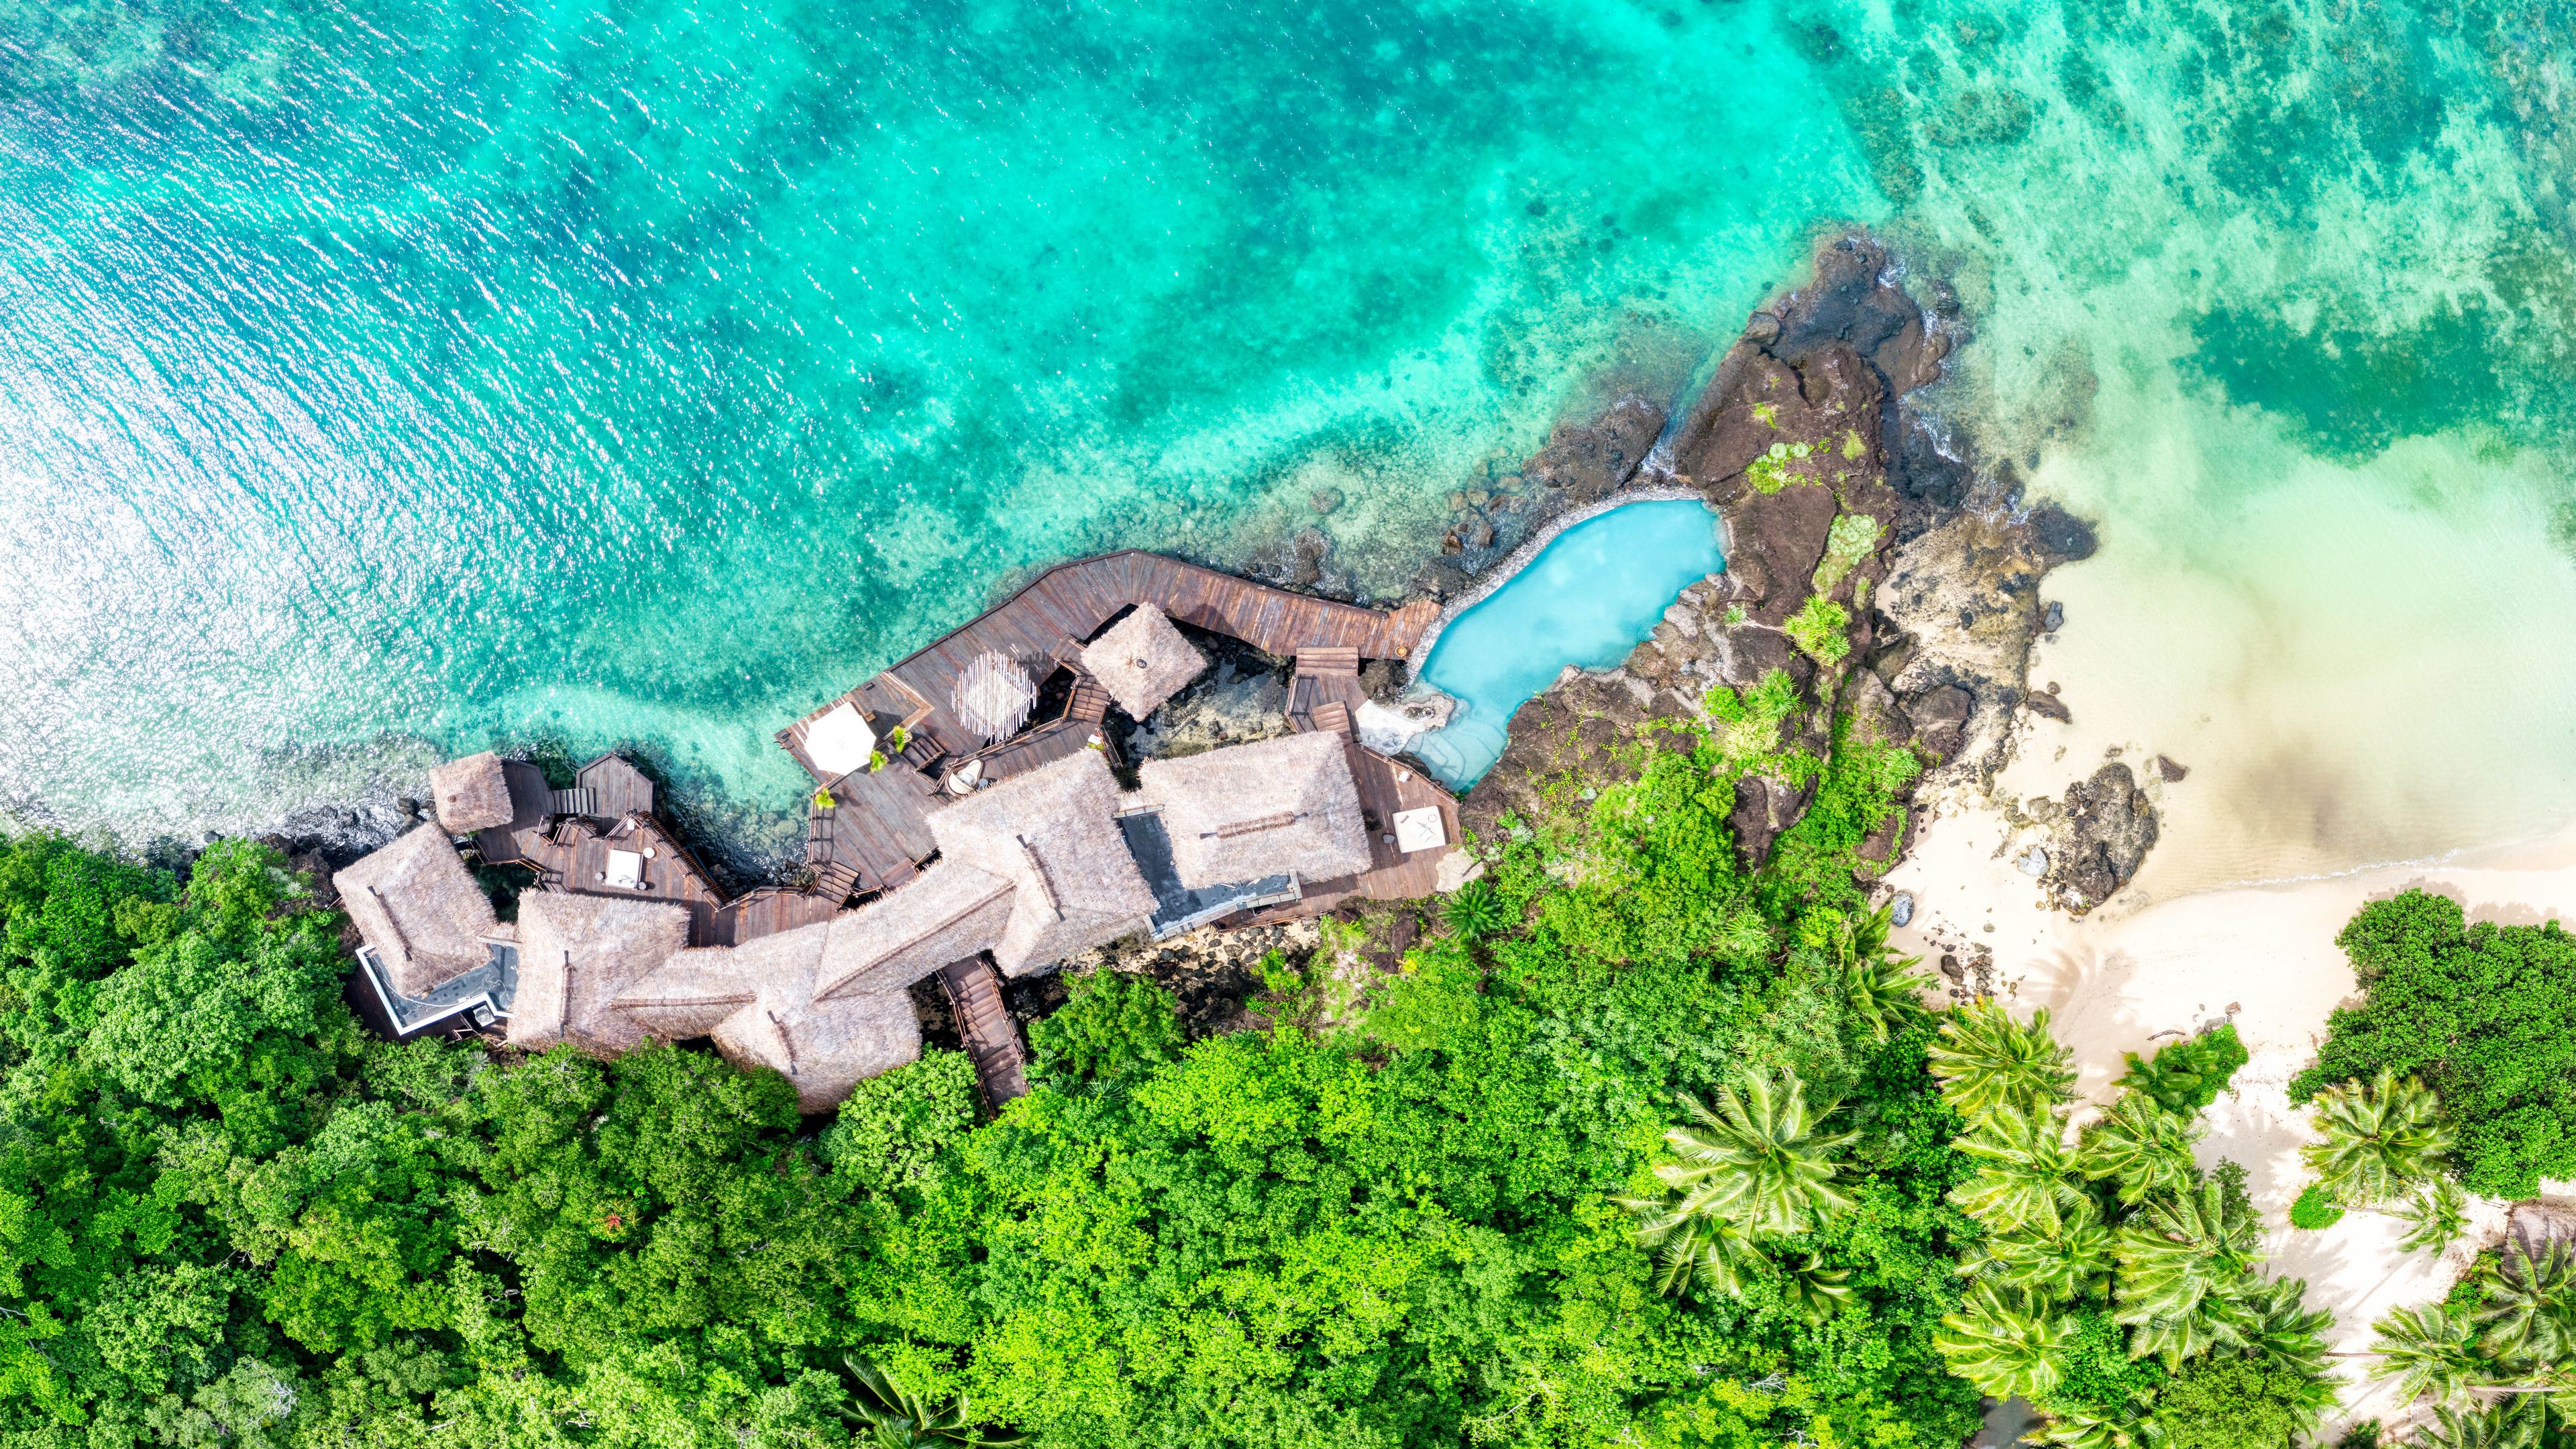 General 3840x2160 photography Trey Ratcliff landscape aerial view water beach nature trees bungalow resort sand rocks swimming pool forest Fiji top view 4K